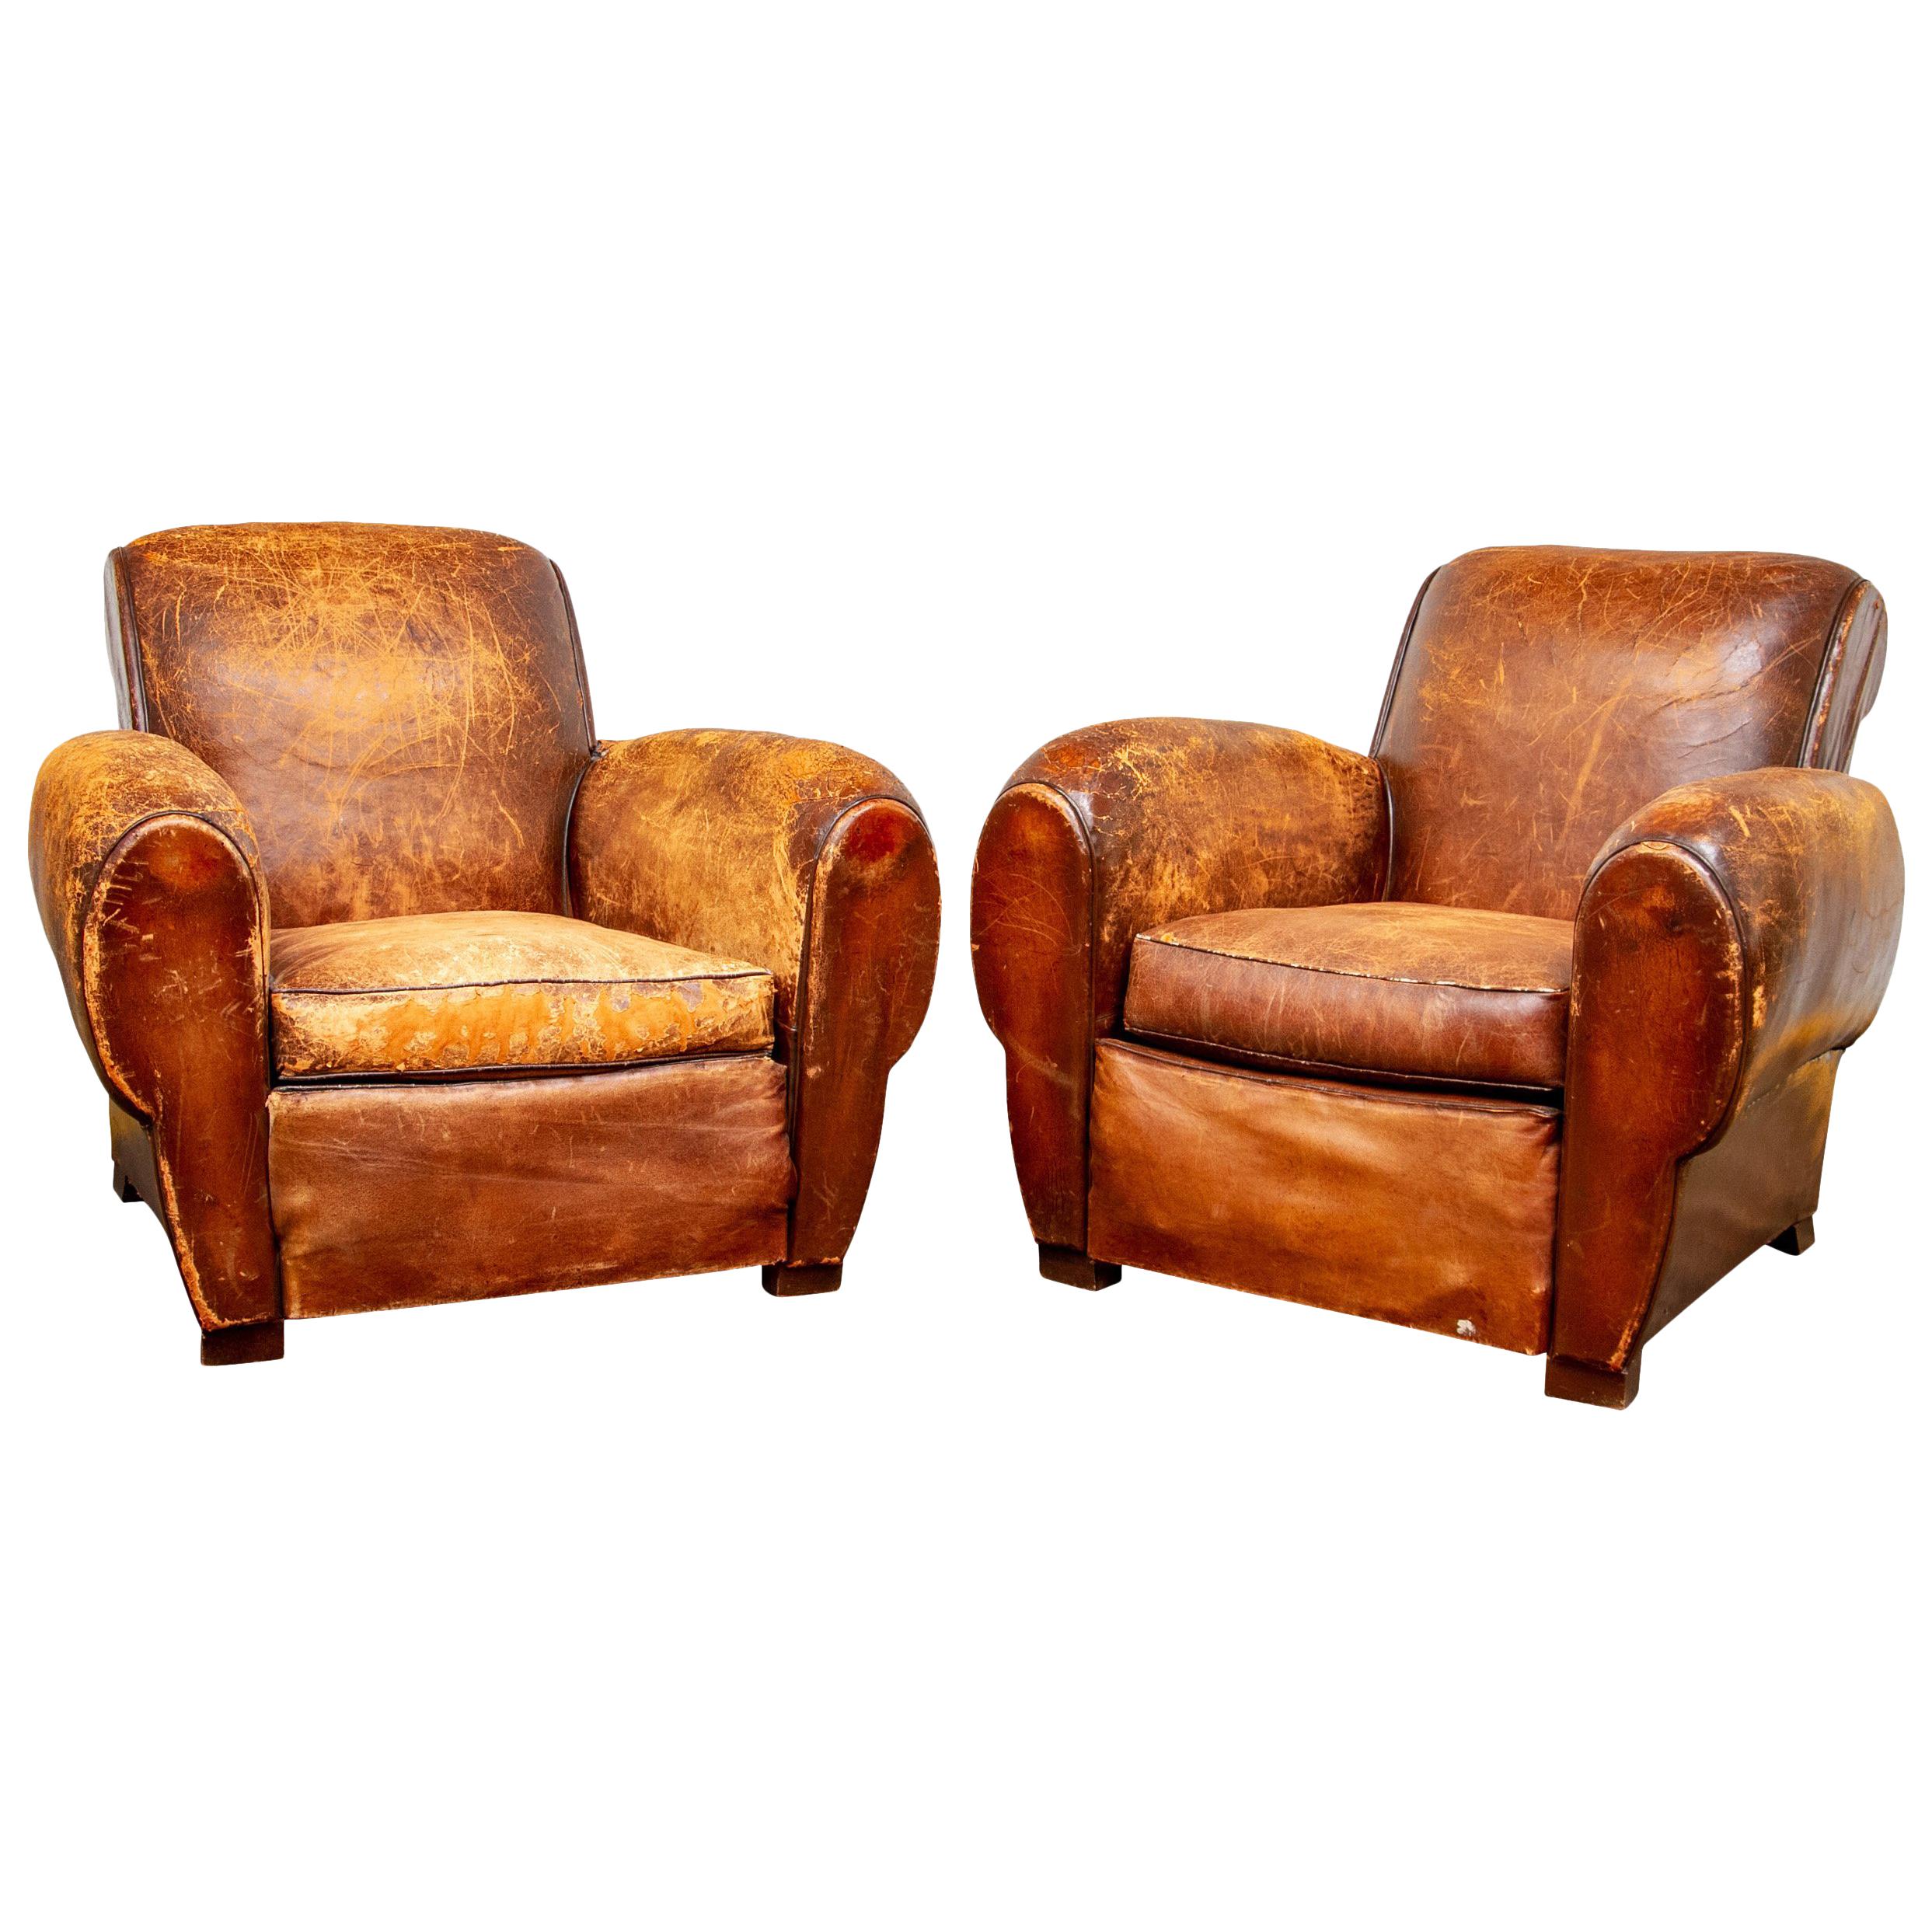 Pair of Heavily Distressed Art Deco Tobacco Leather Club Chairs